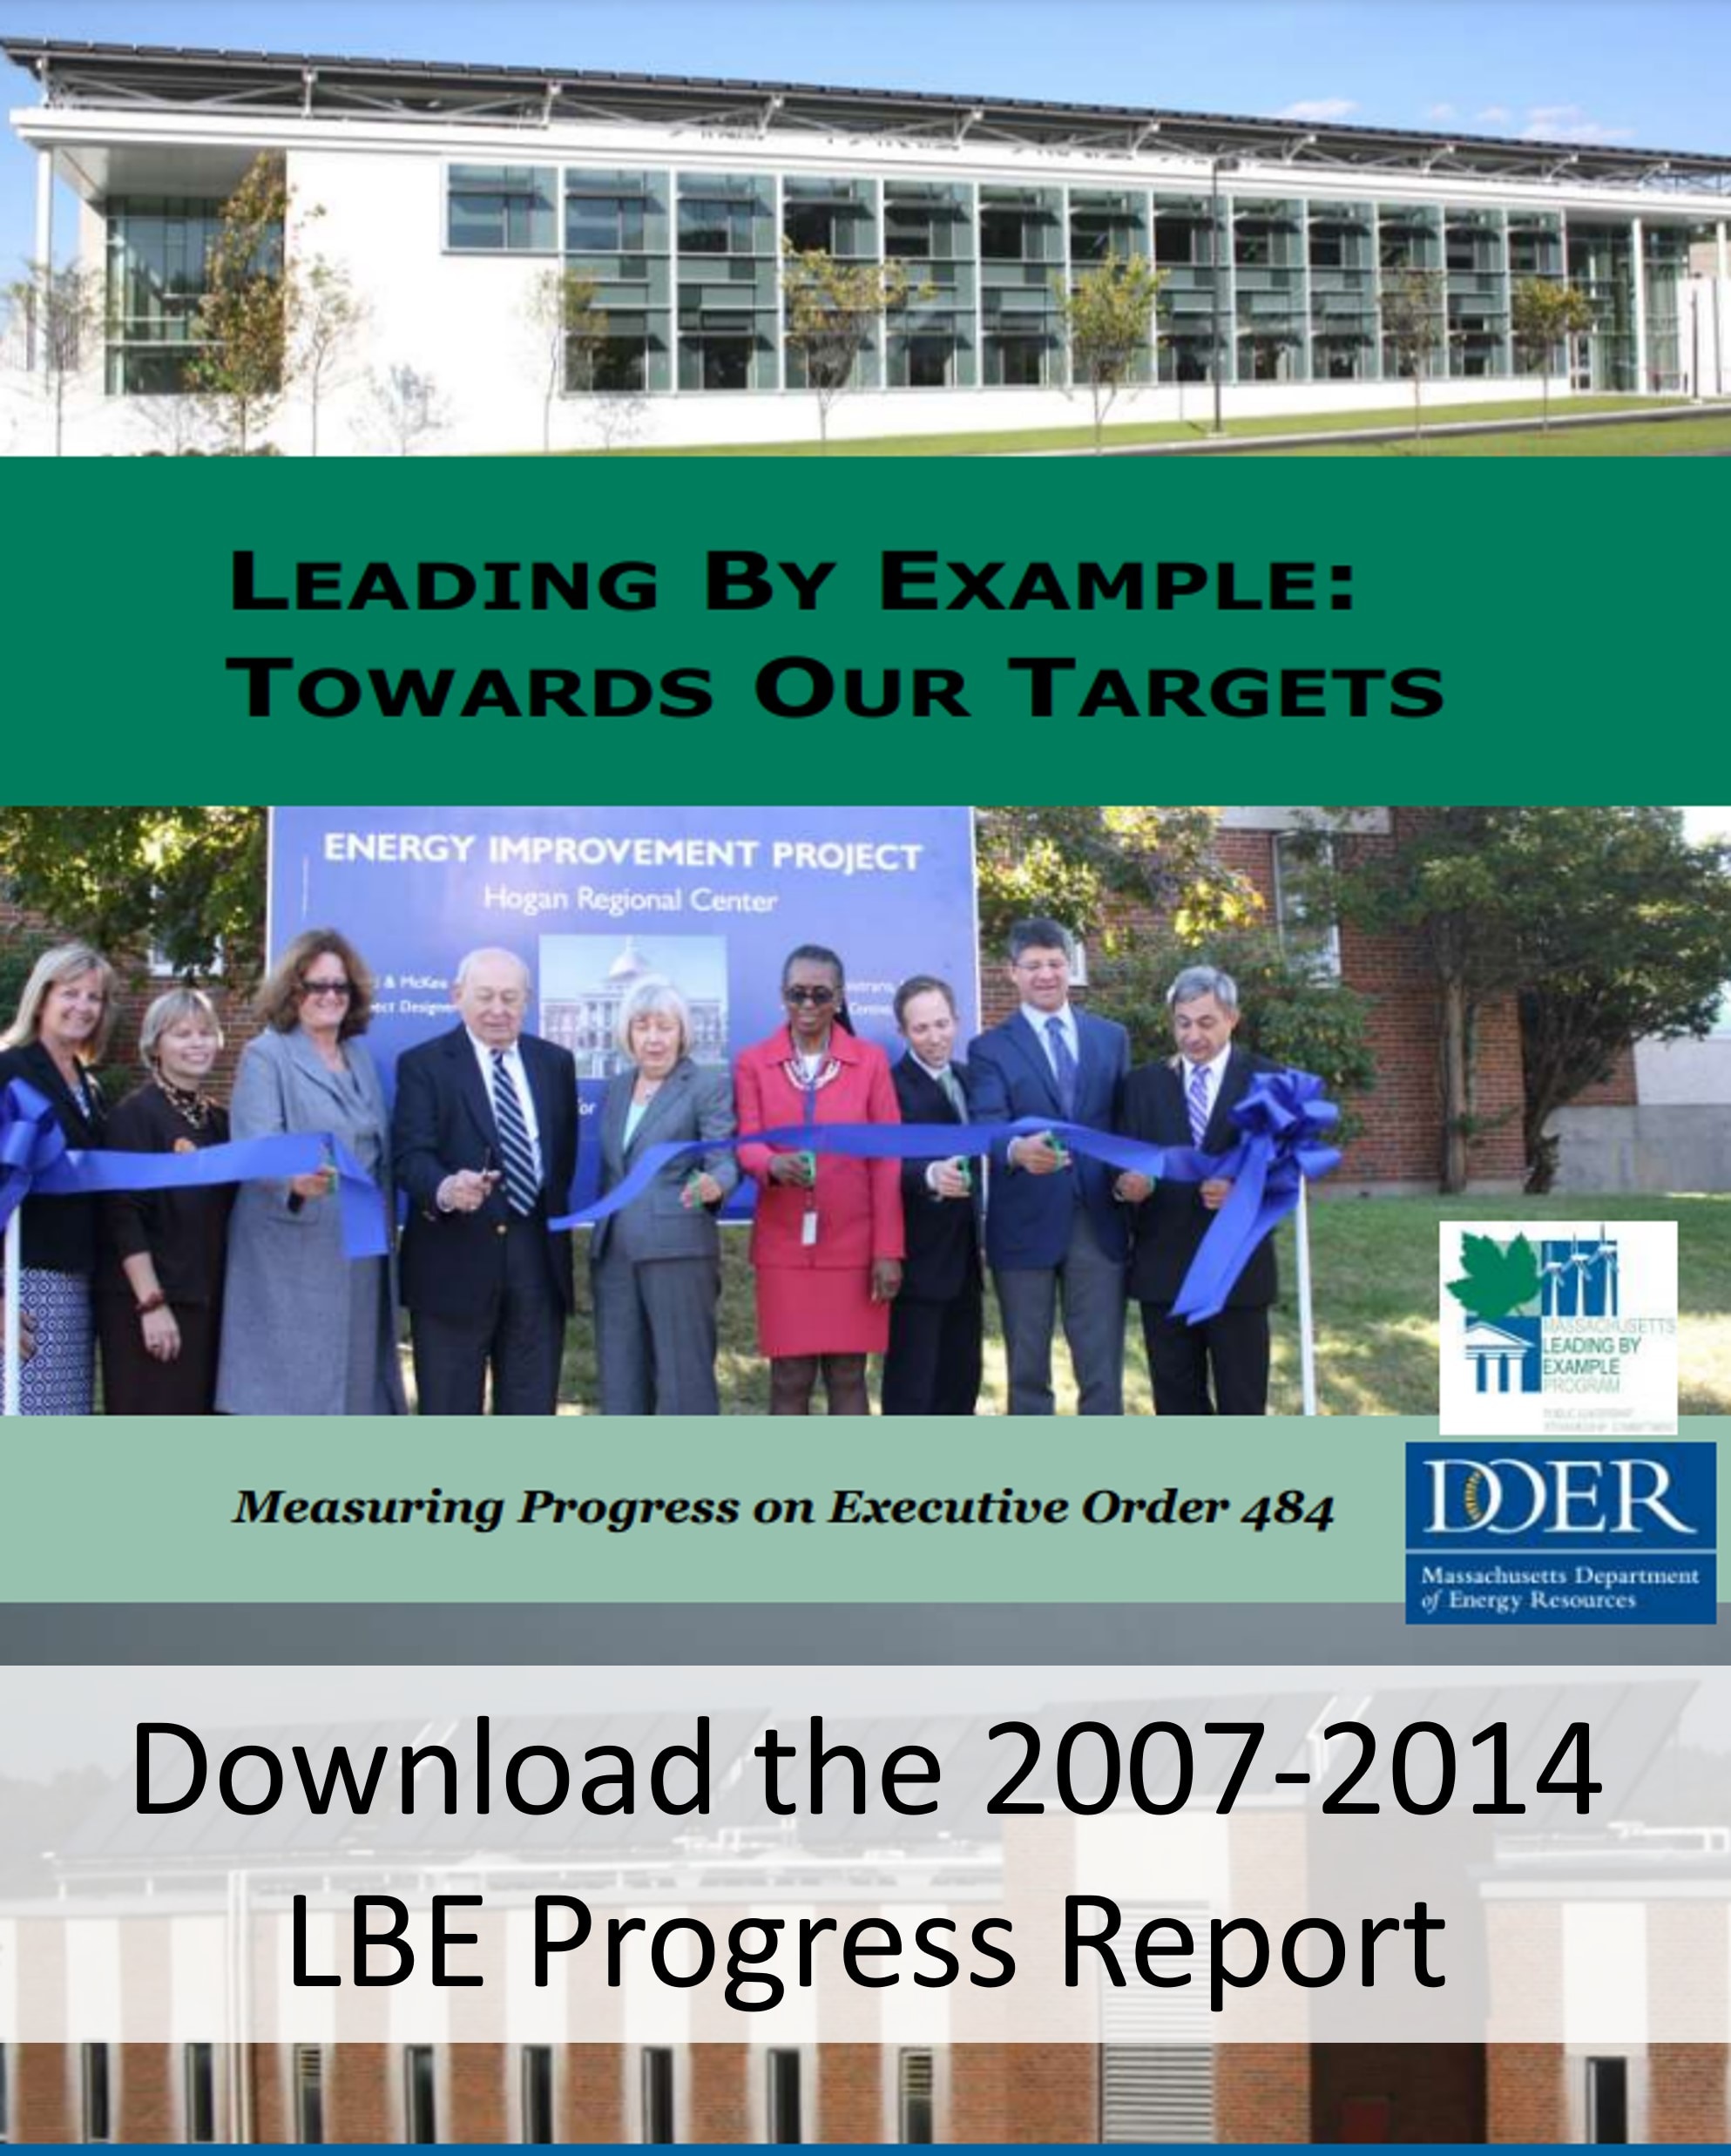 This report details progress made towards EO484 targets from 2007-2014.